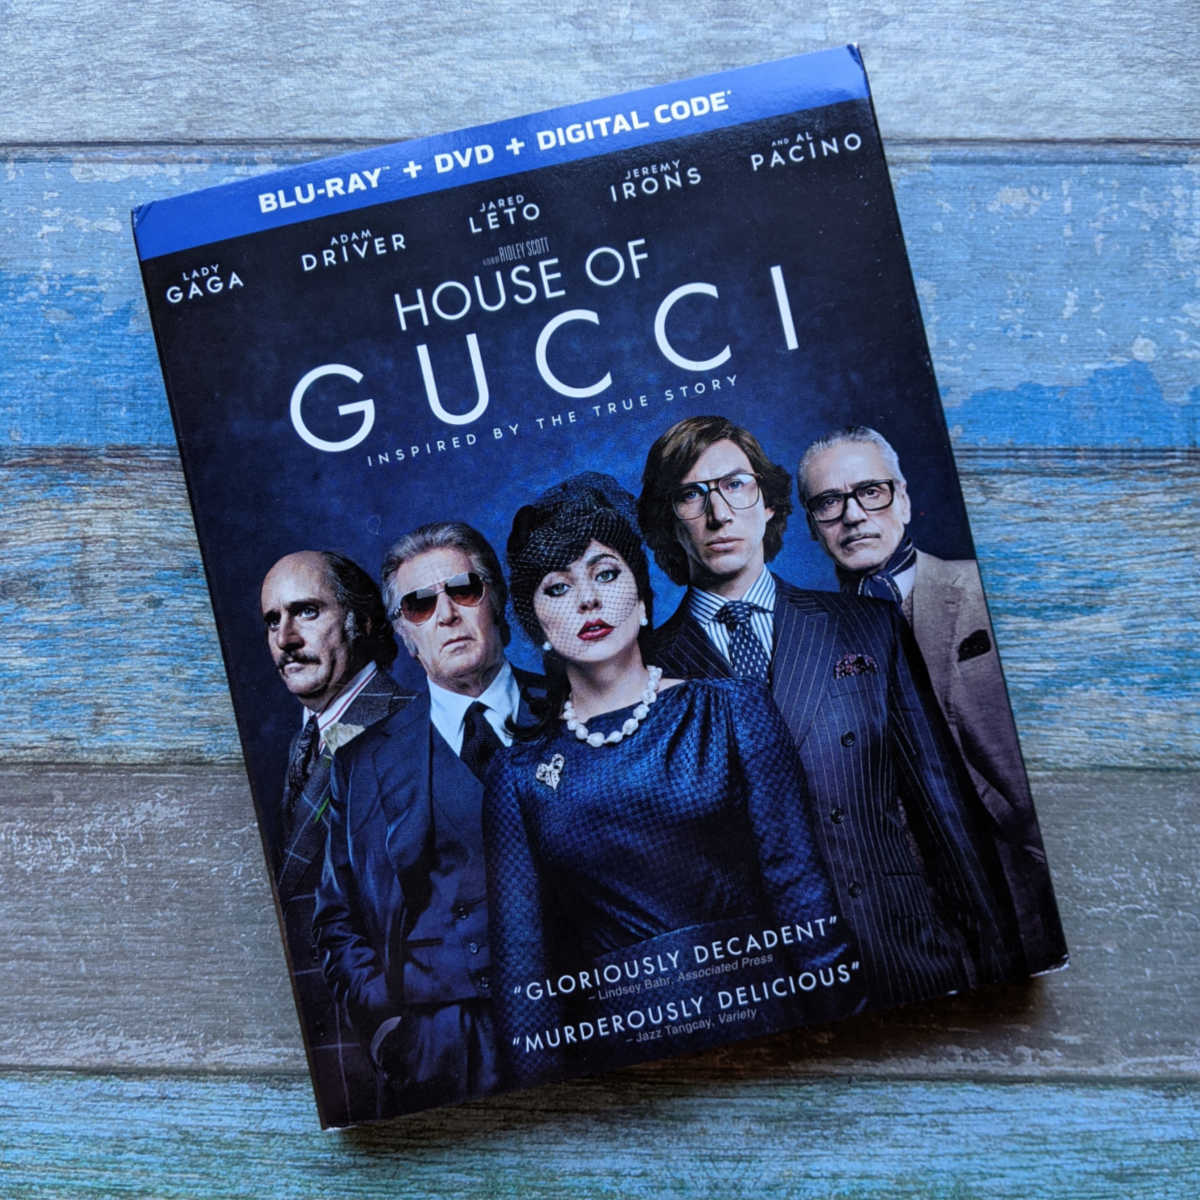 blu-ray dvd house of gucci movie